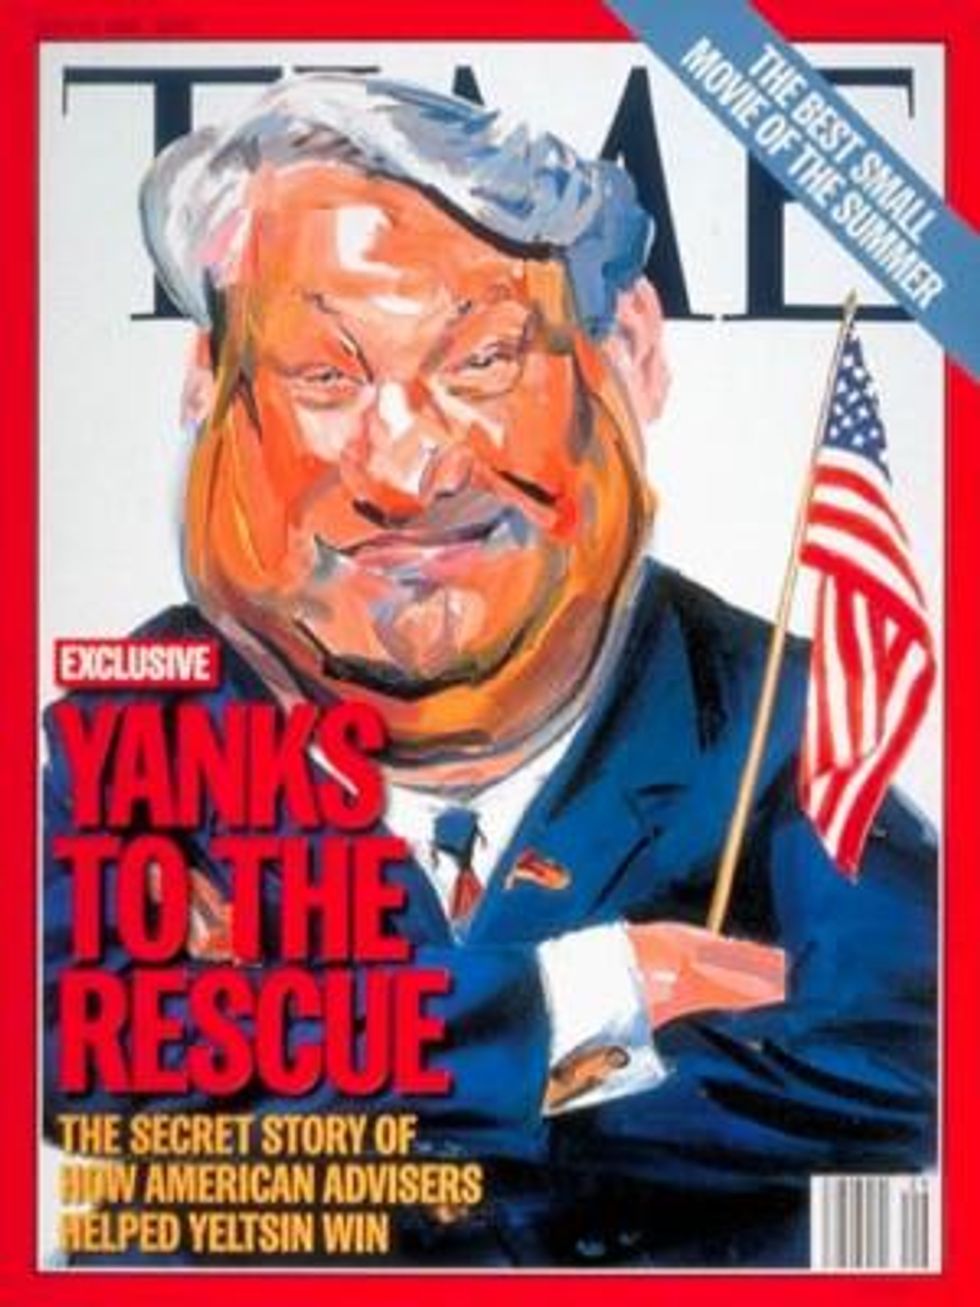 Time magazine cover (7/15/96) celebrating  US intervention in the Russian presidential election